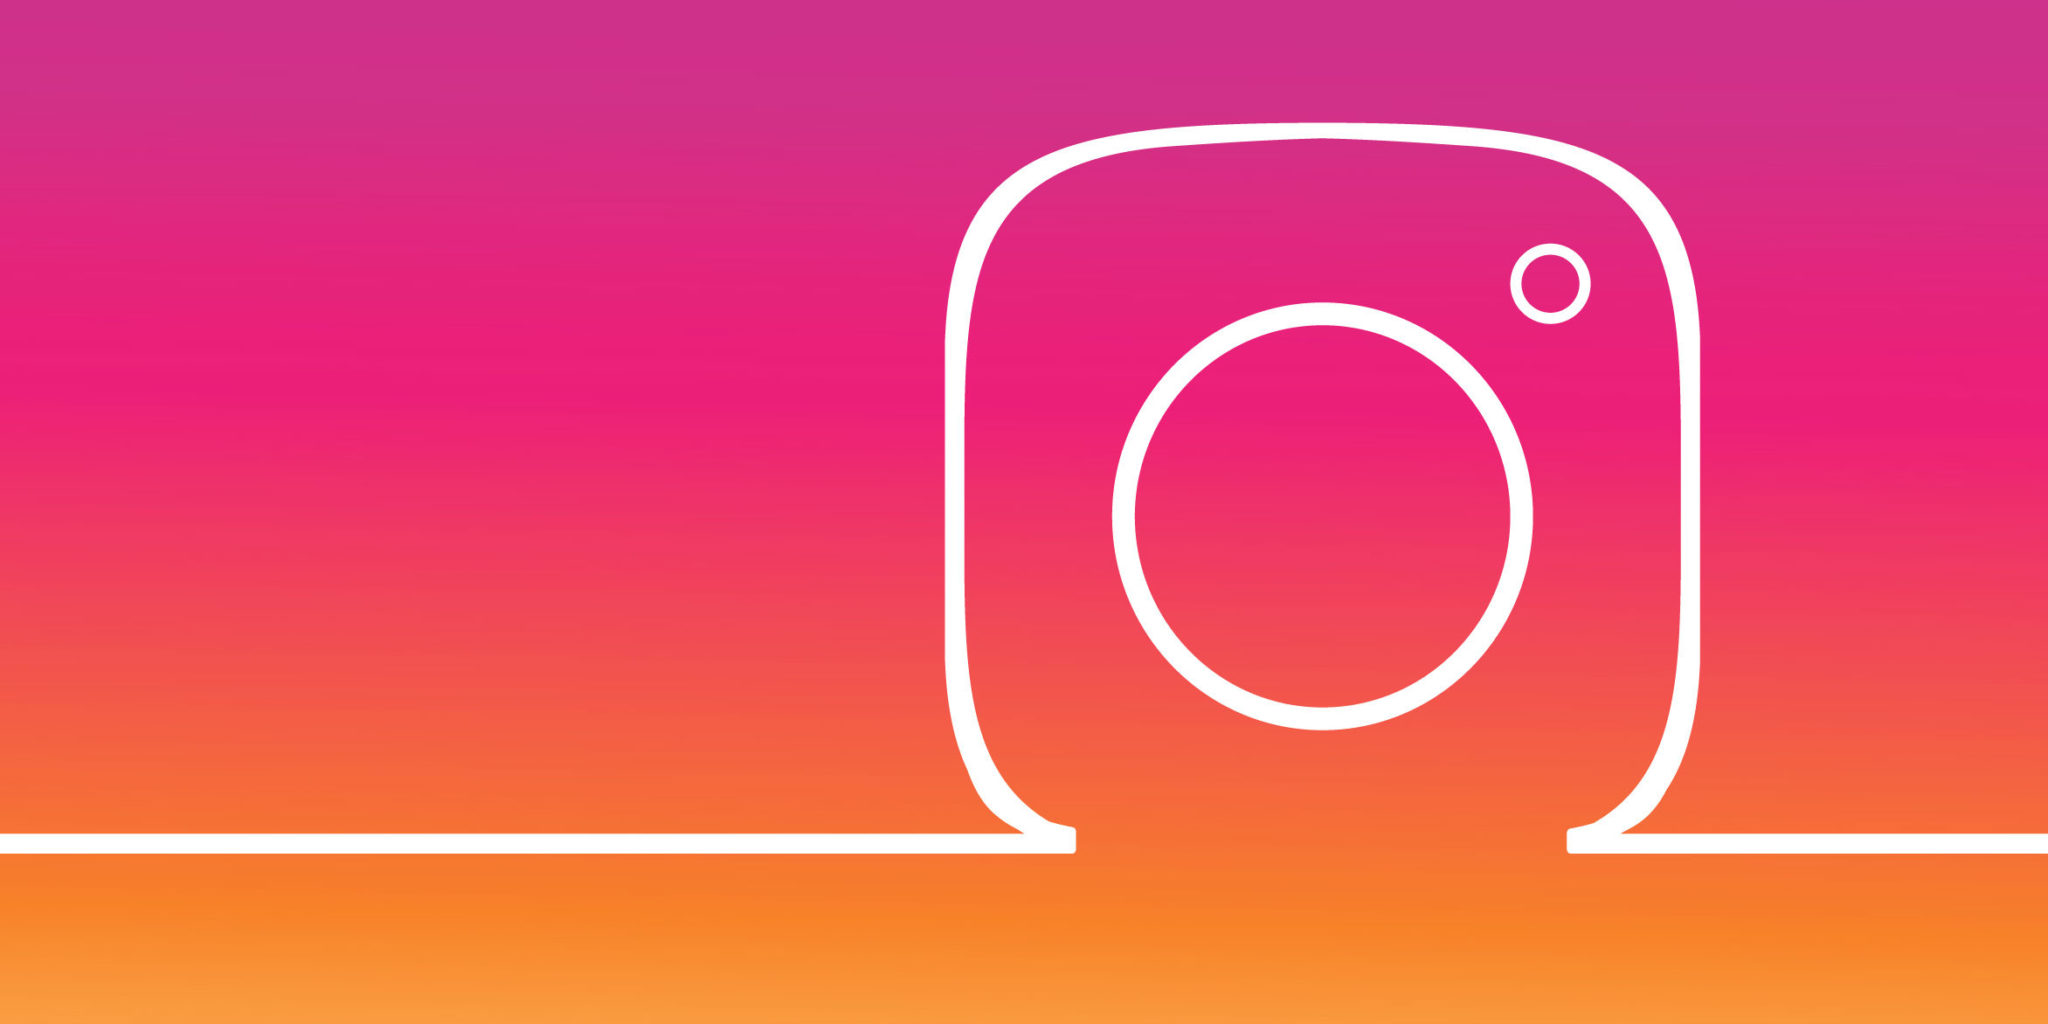 Instagram adds status dots to see when your friends are online